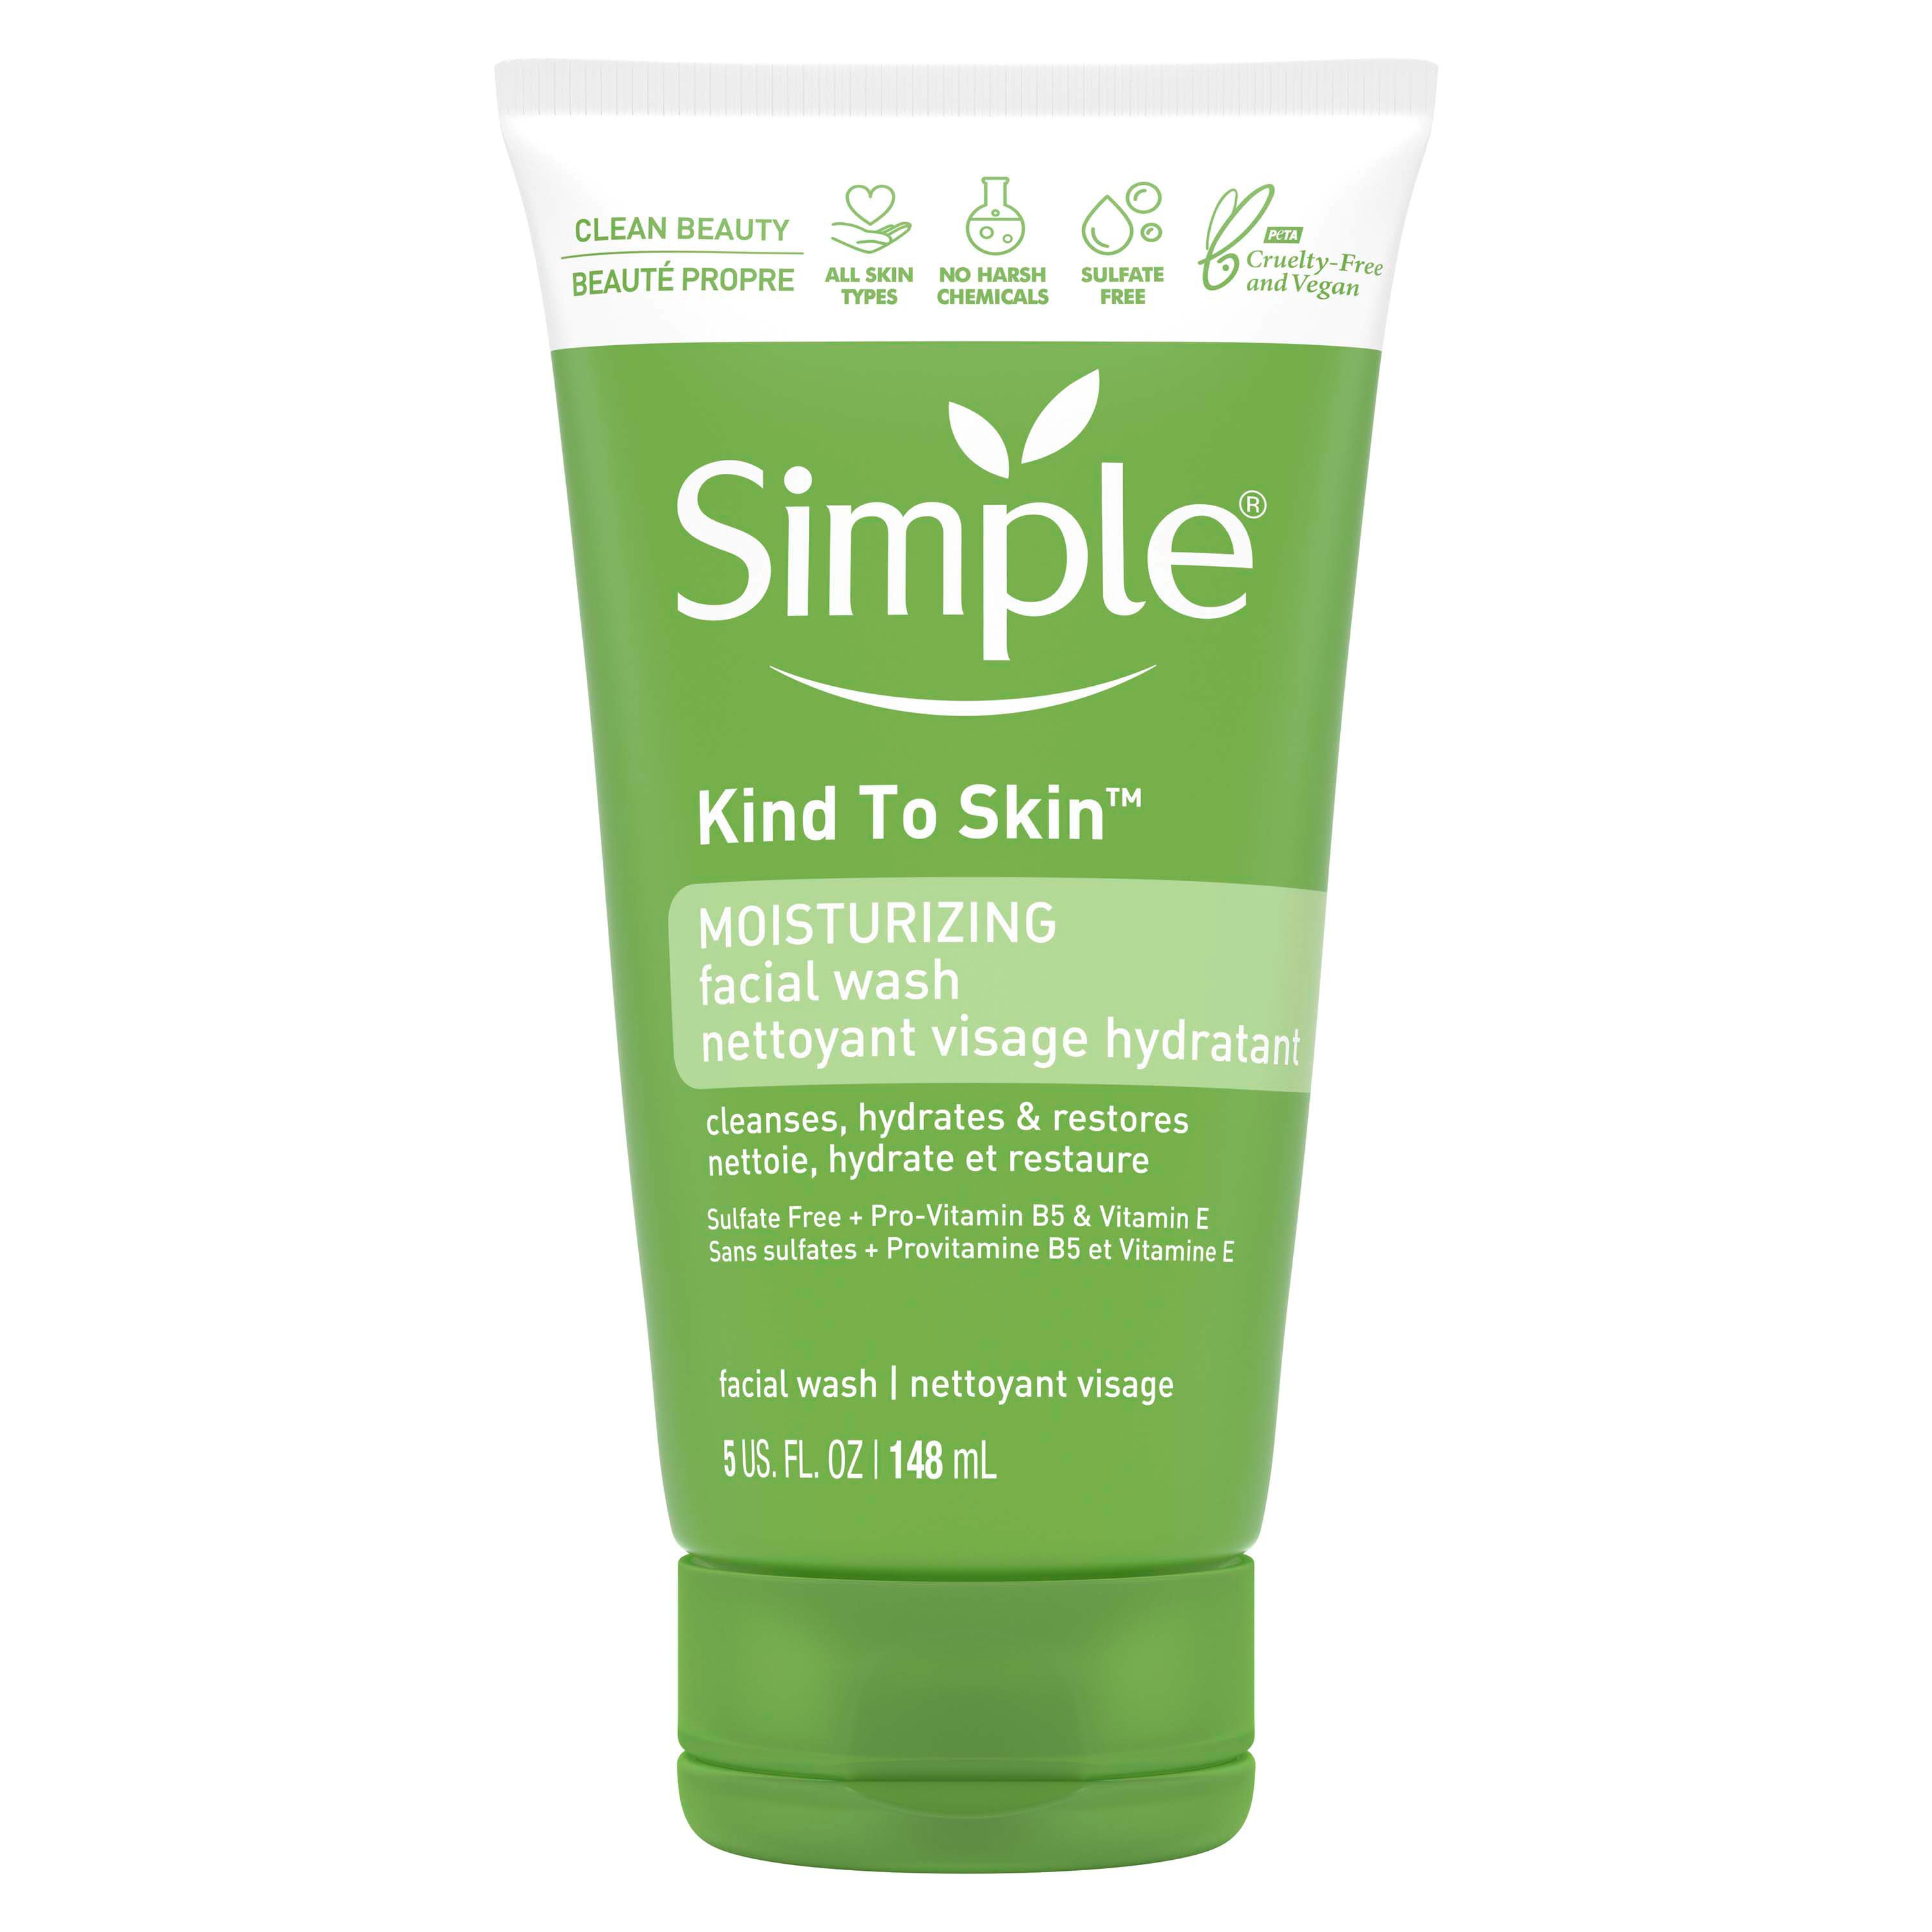 Simple Kind To Skin Moisturizing Facial Wash Shop Cleansers And Soaps